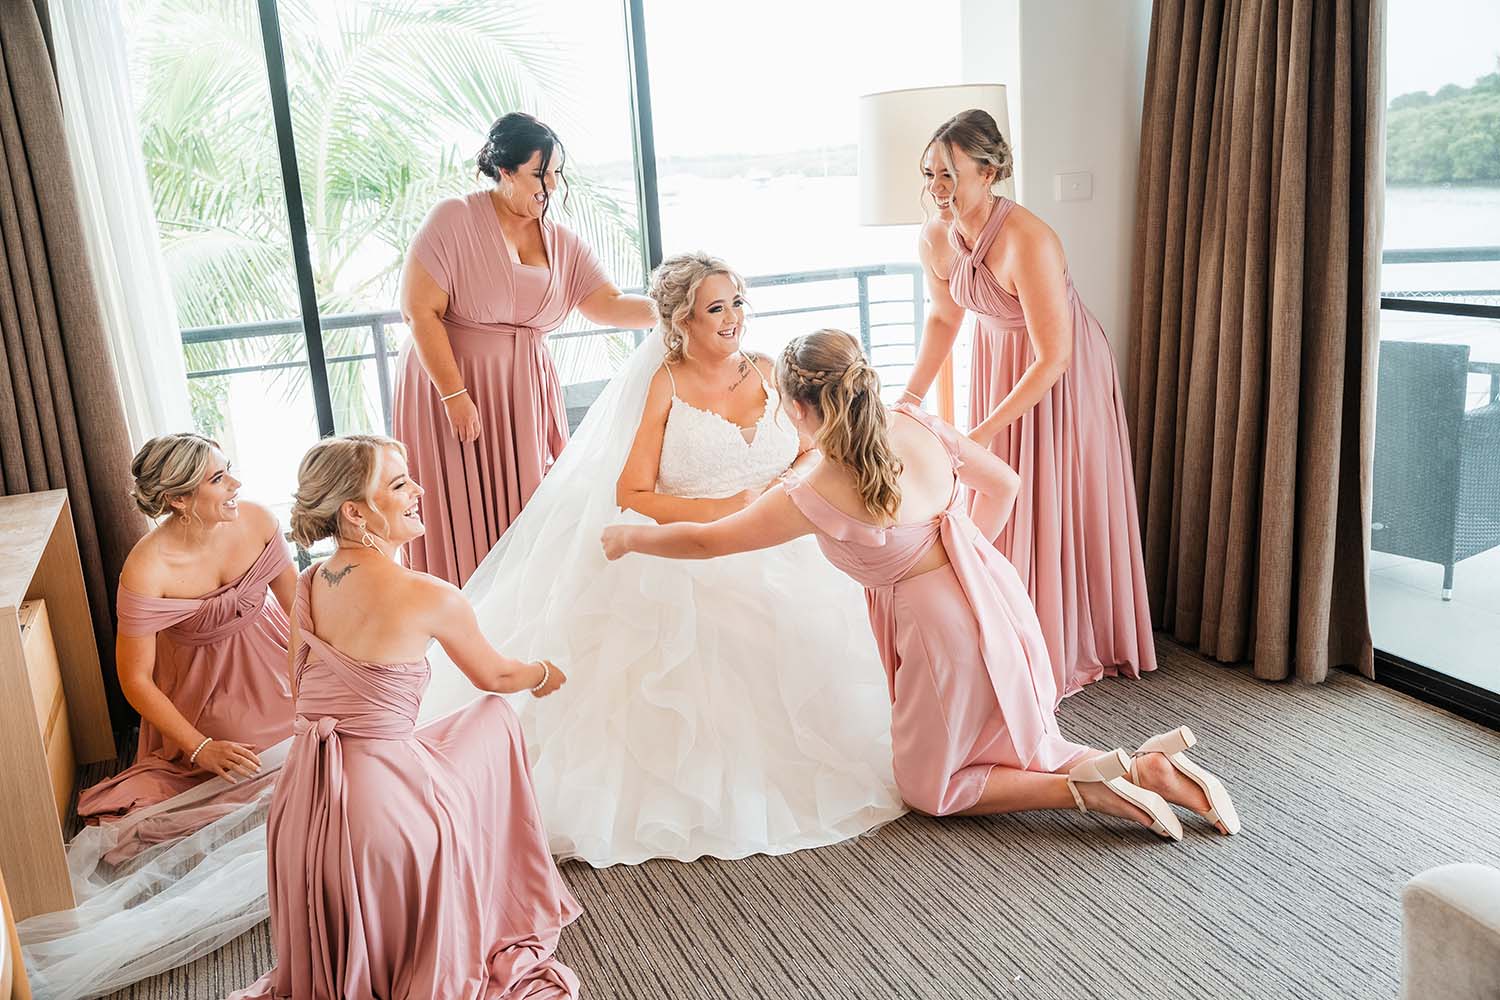 Wedding Photography - Bride getting ready with bridesmaids